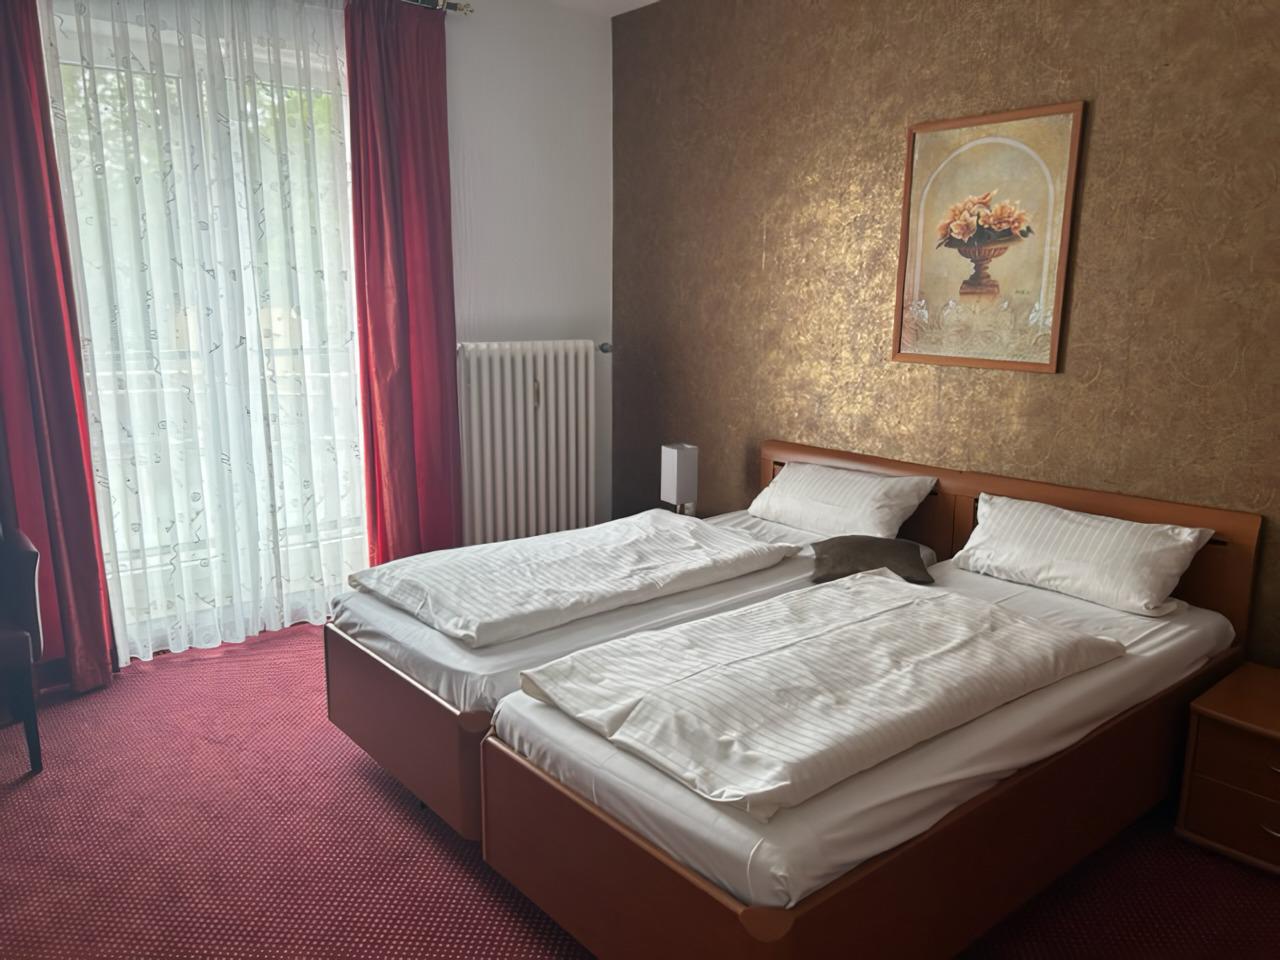 Hotel Germania, Aachener Str. 1230 in Cologne